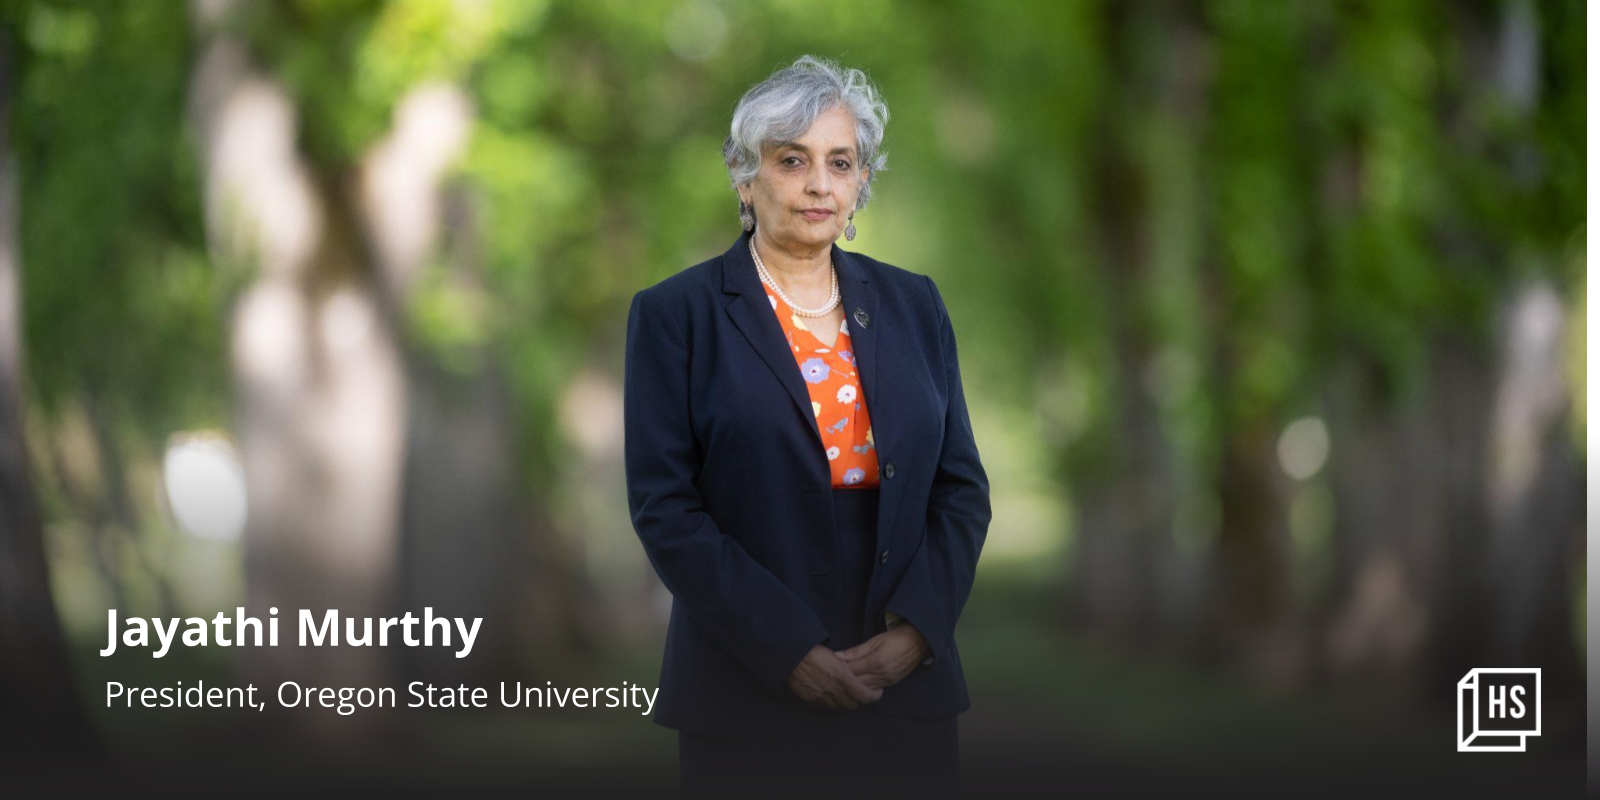 Meet Jayathi Murthy, the first woman of colour to head Oregon State University

